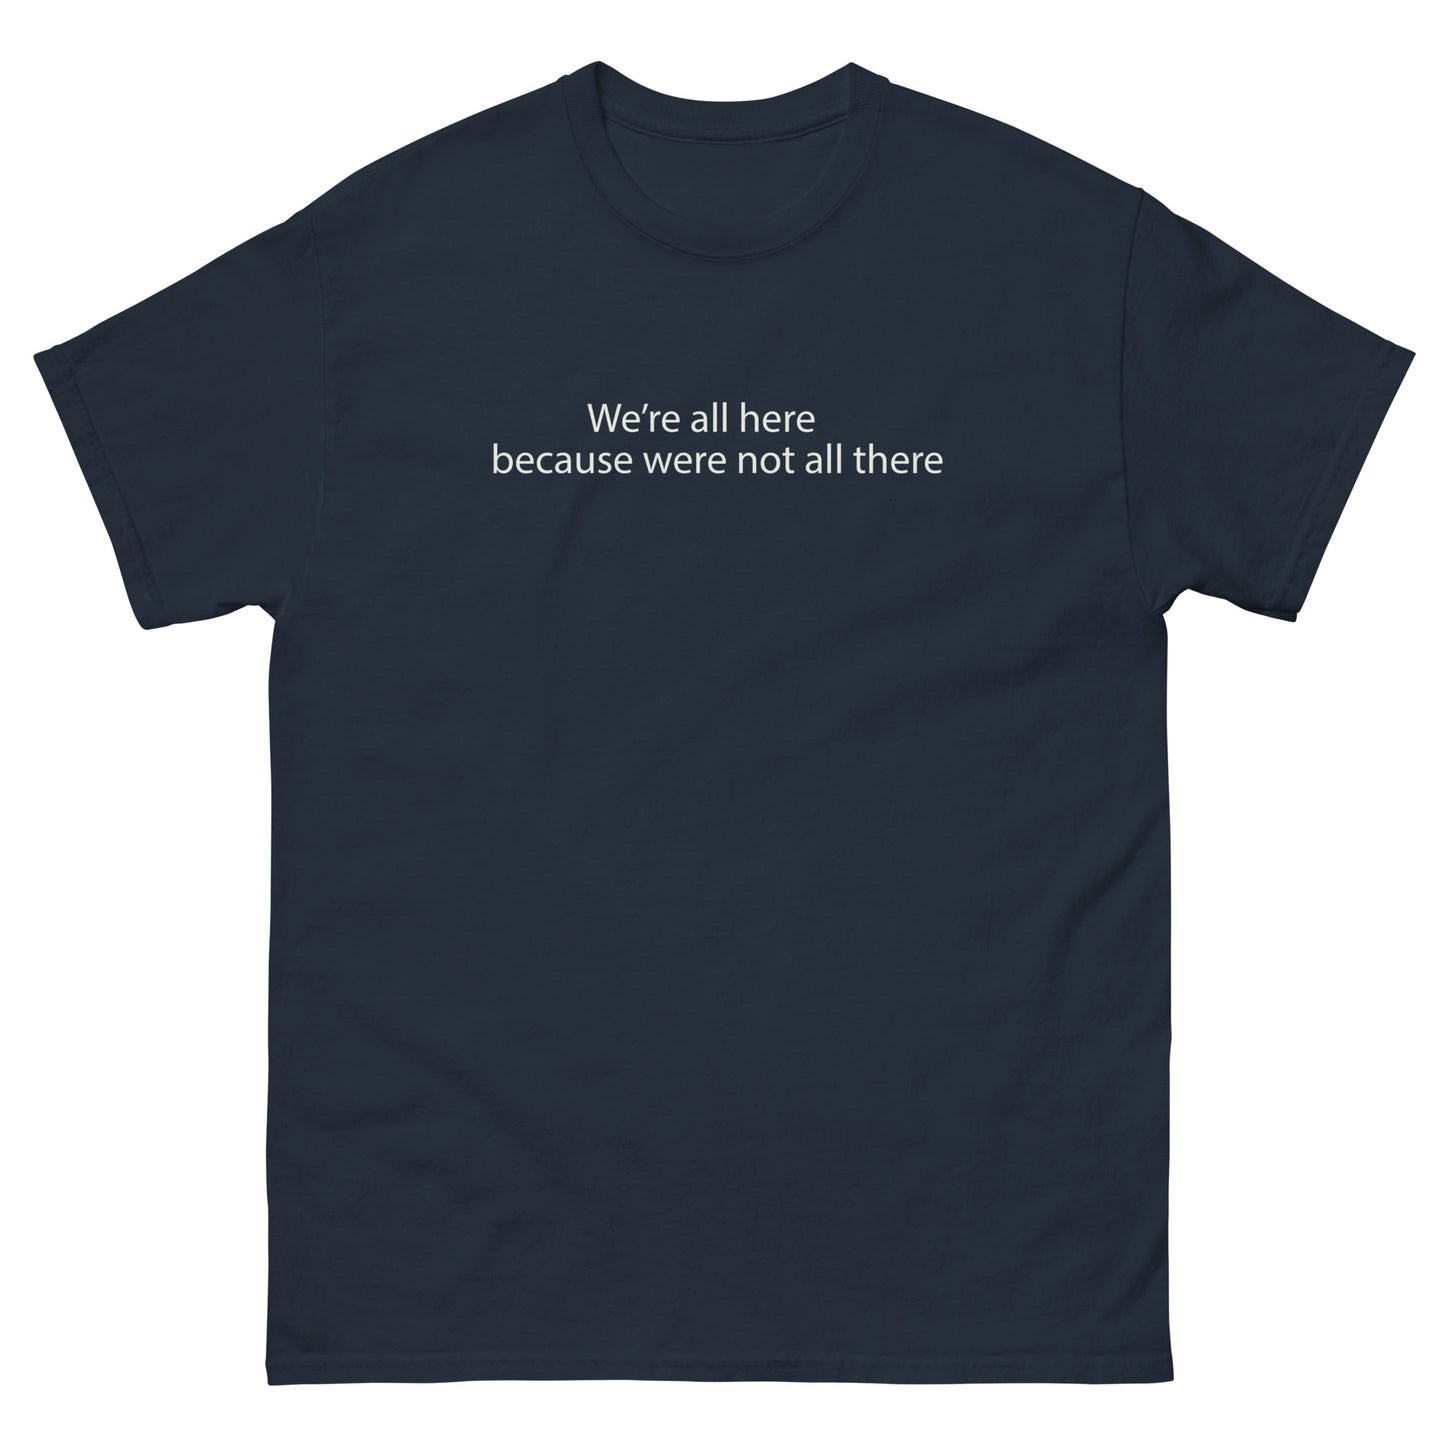 We're all here because were not all there t shirt